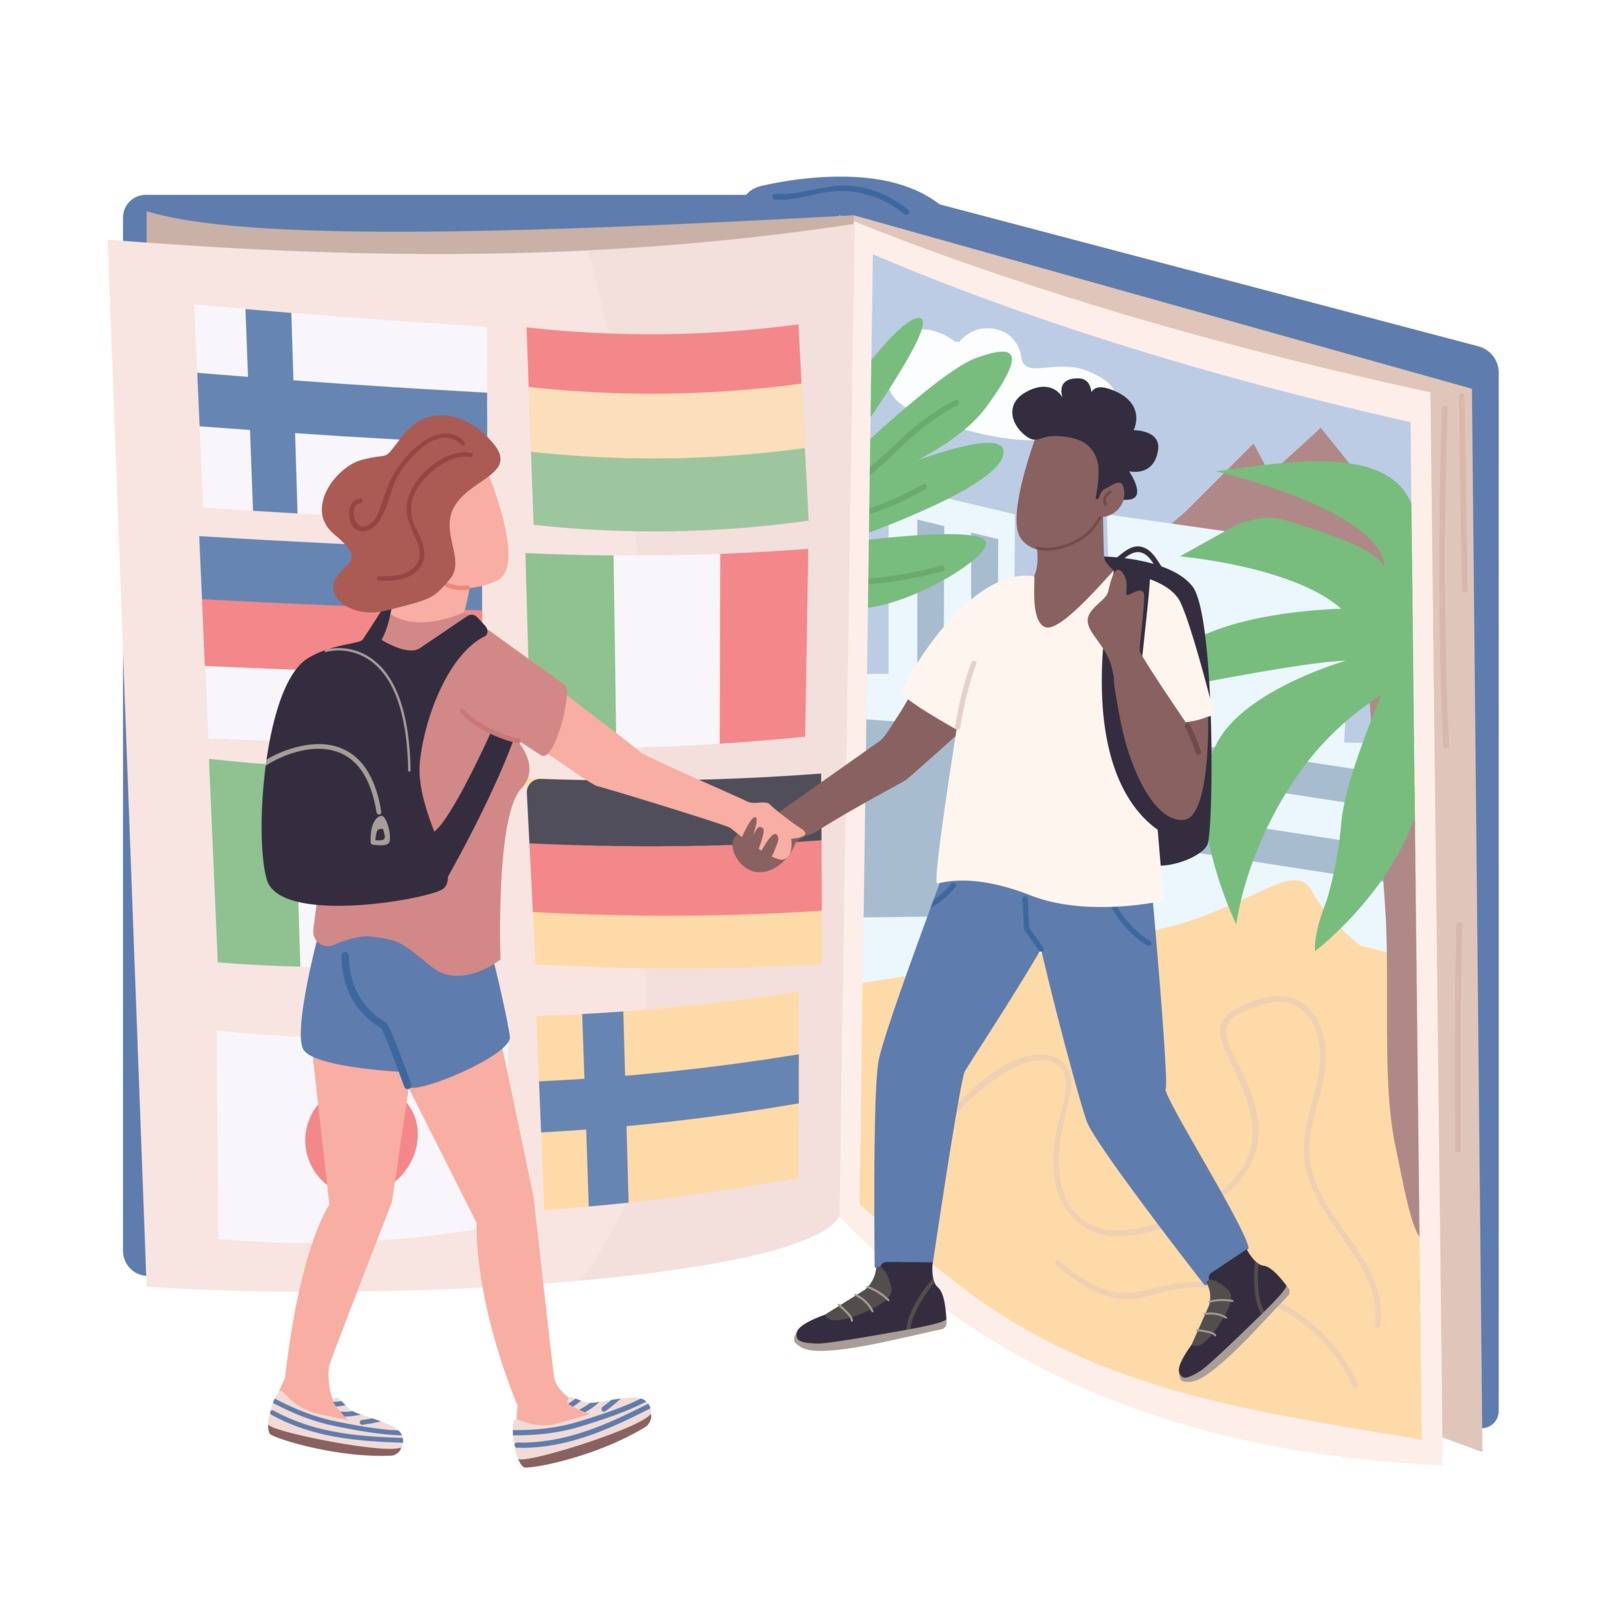 Student exchange program flat concept vector illustration. Caucasian girl and african american boy, university pupils 2D cartoon characters for web design. Education abroad experience creative idea by ntl